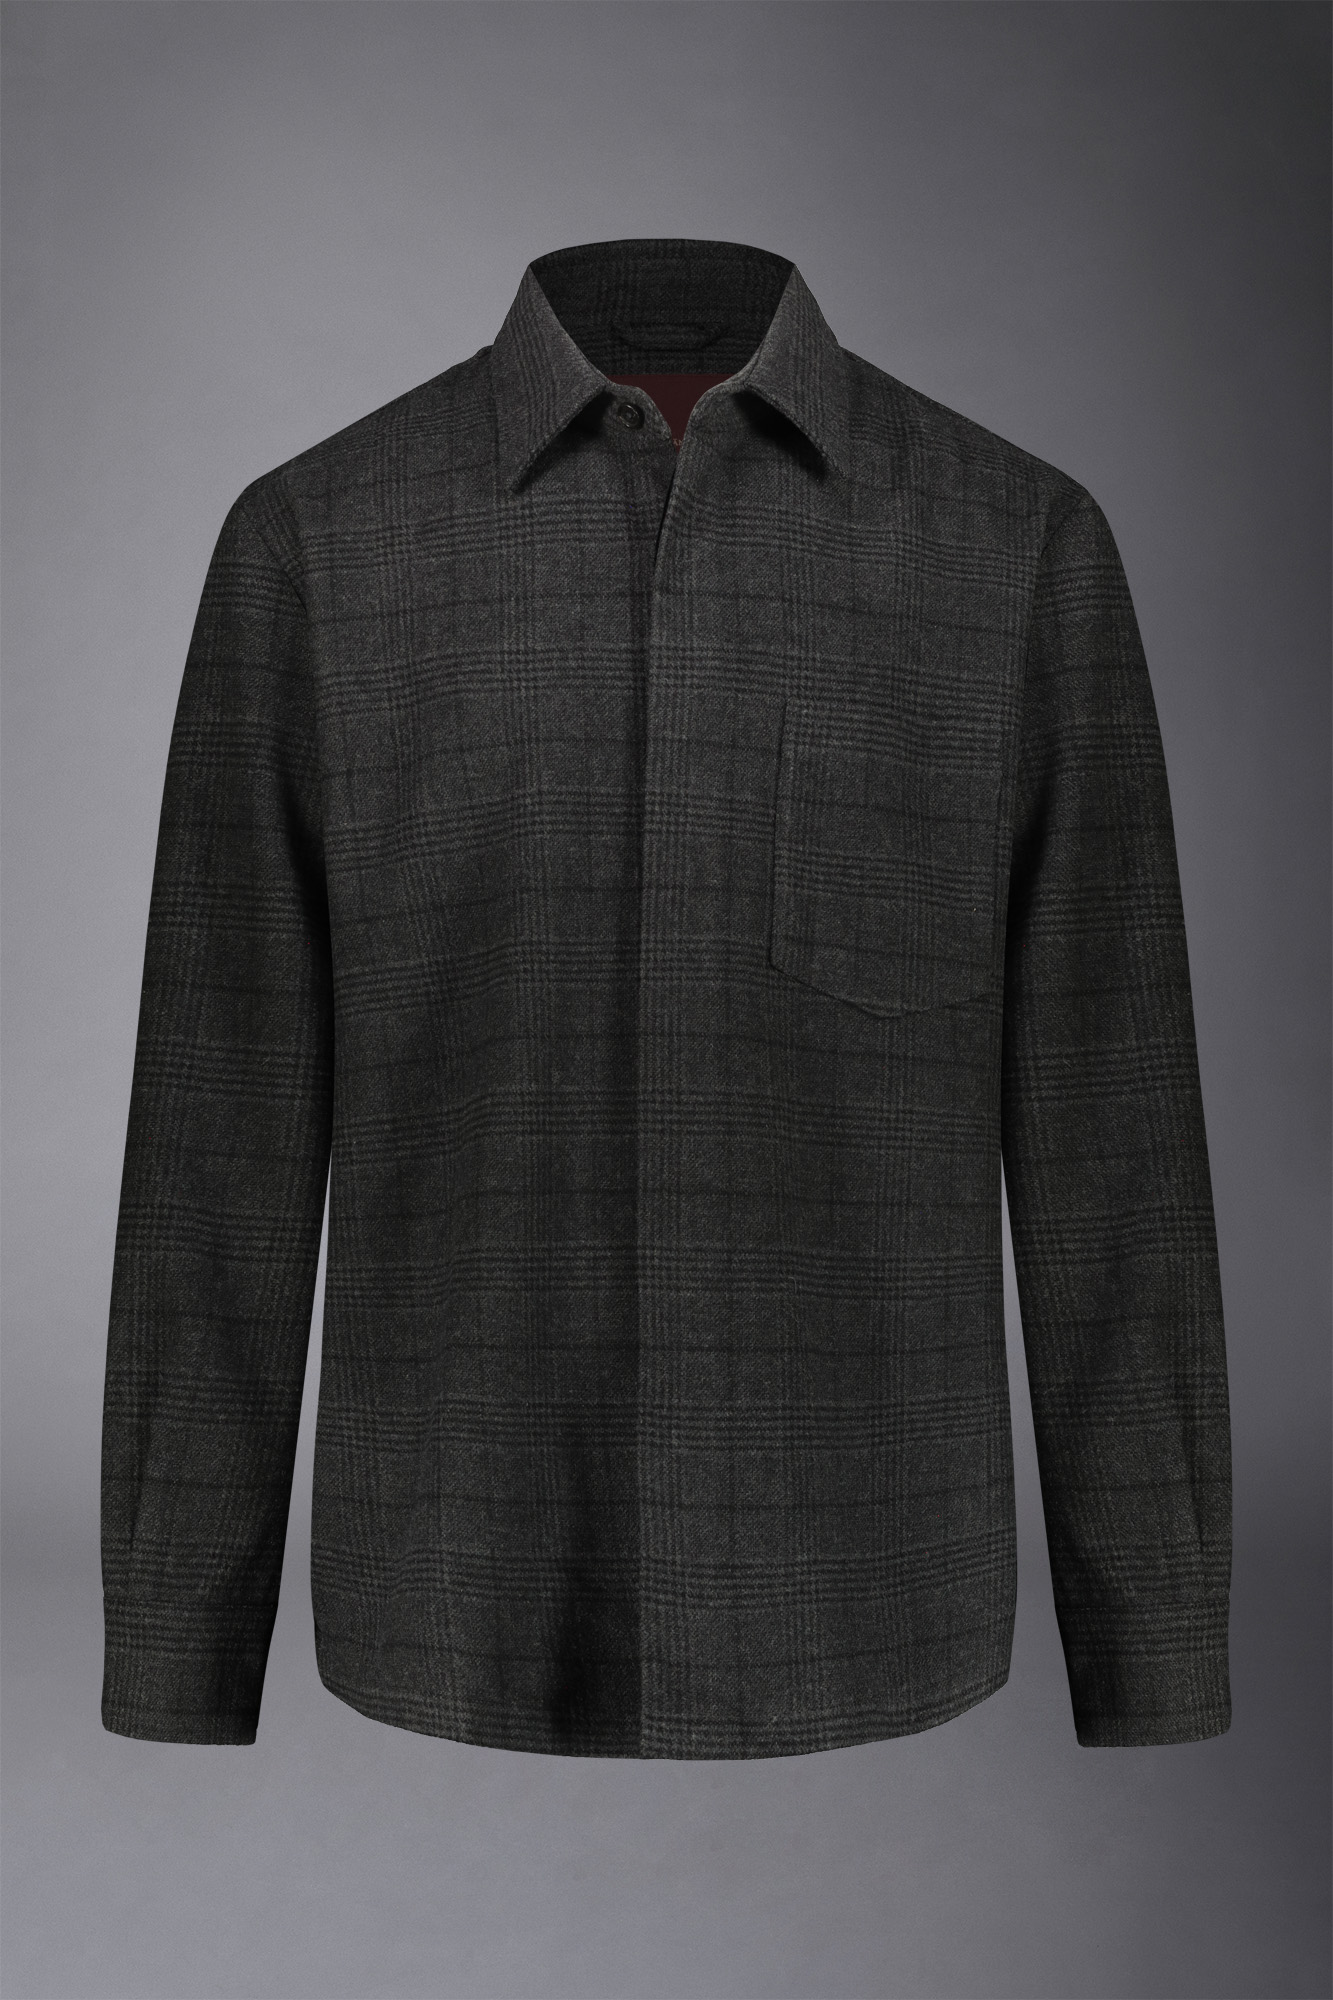 Men's shirt jacket wool blend checked fabric regular fit image number null